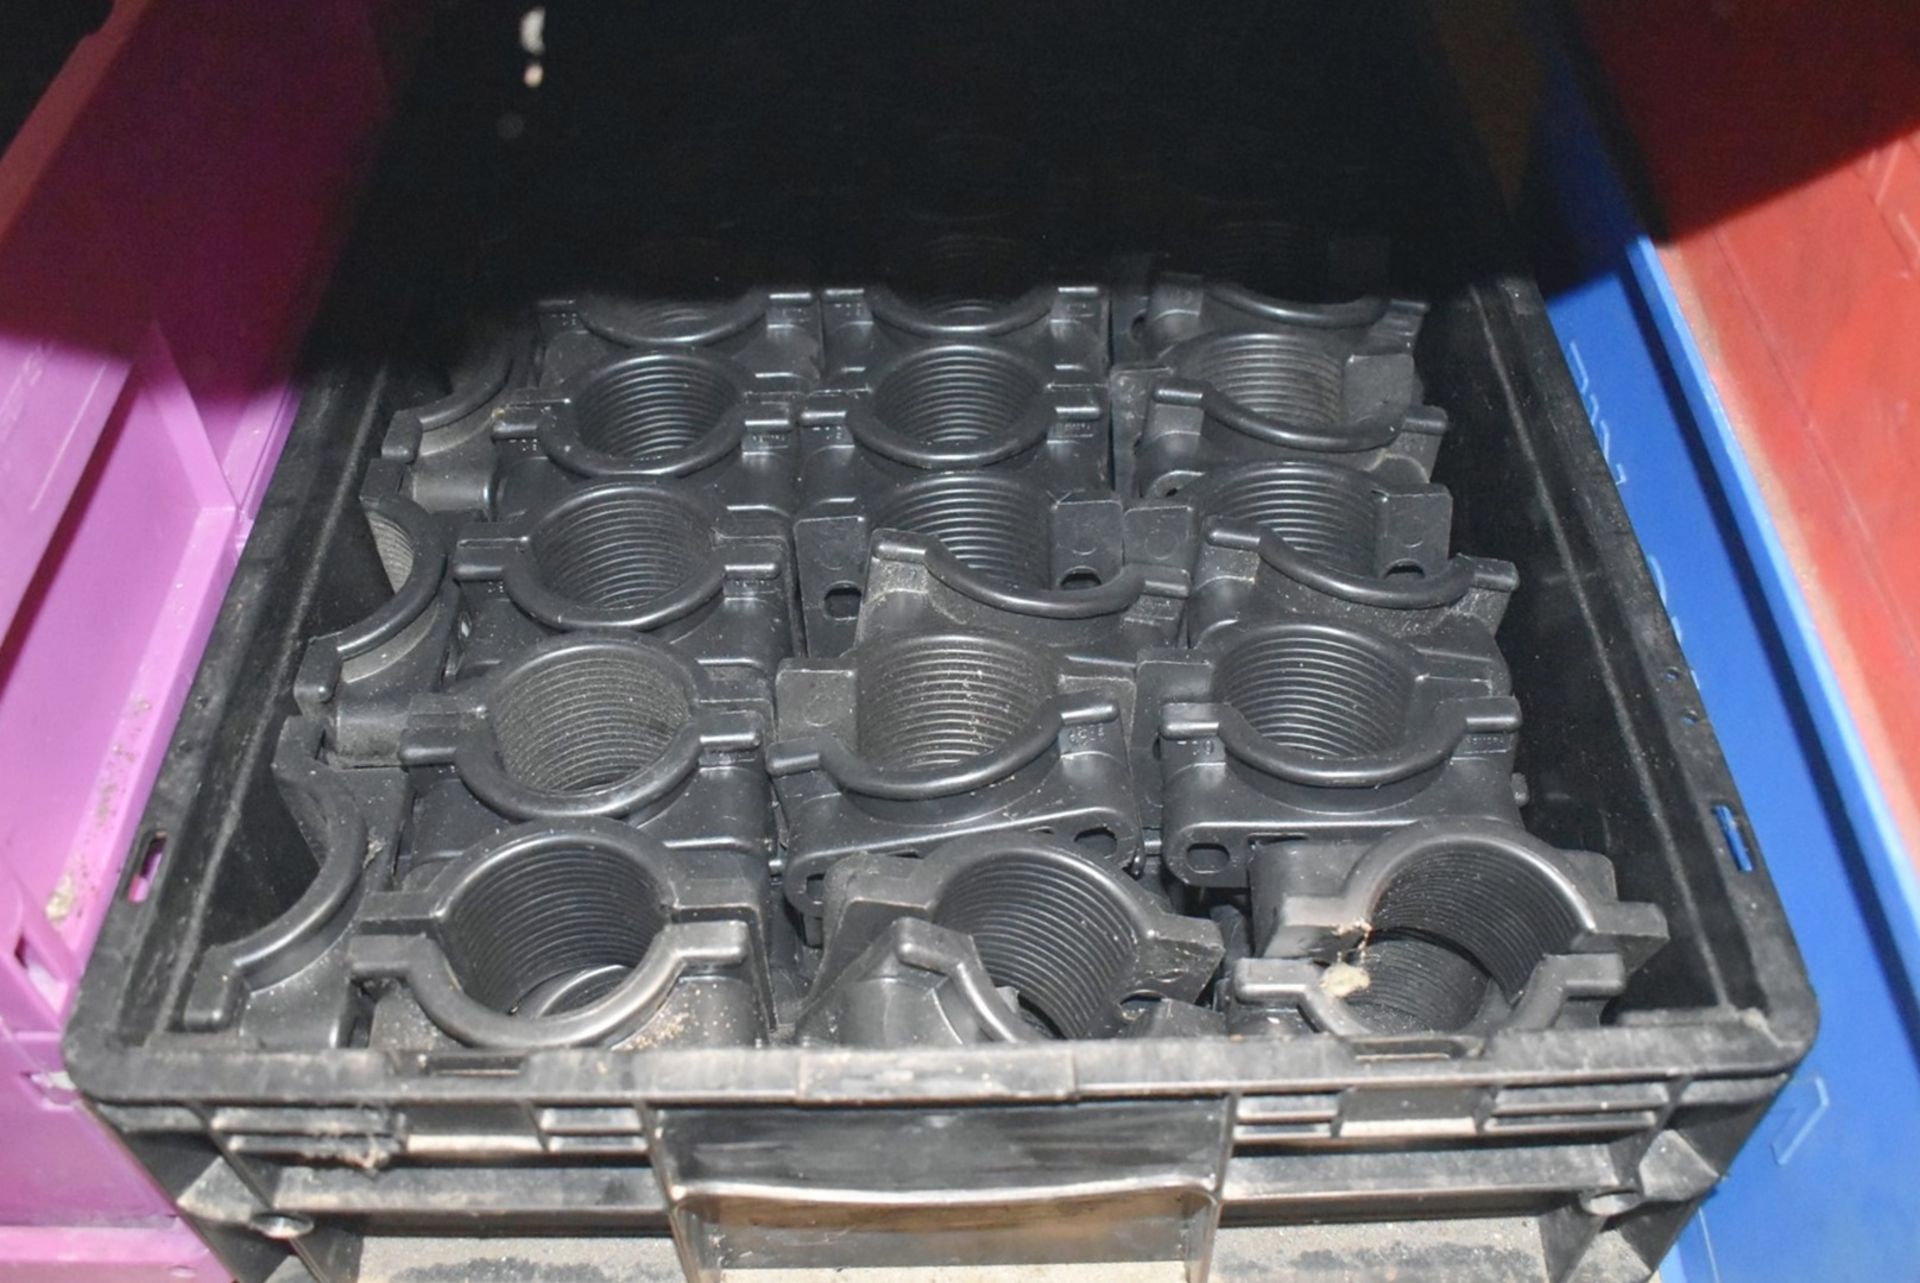 9 x Storage Containers Containing a Variety of Cable and Pipe Cleats - Unused Stock! - Image 6 of 11